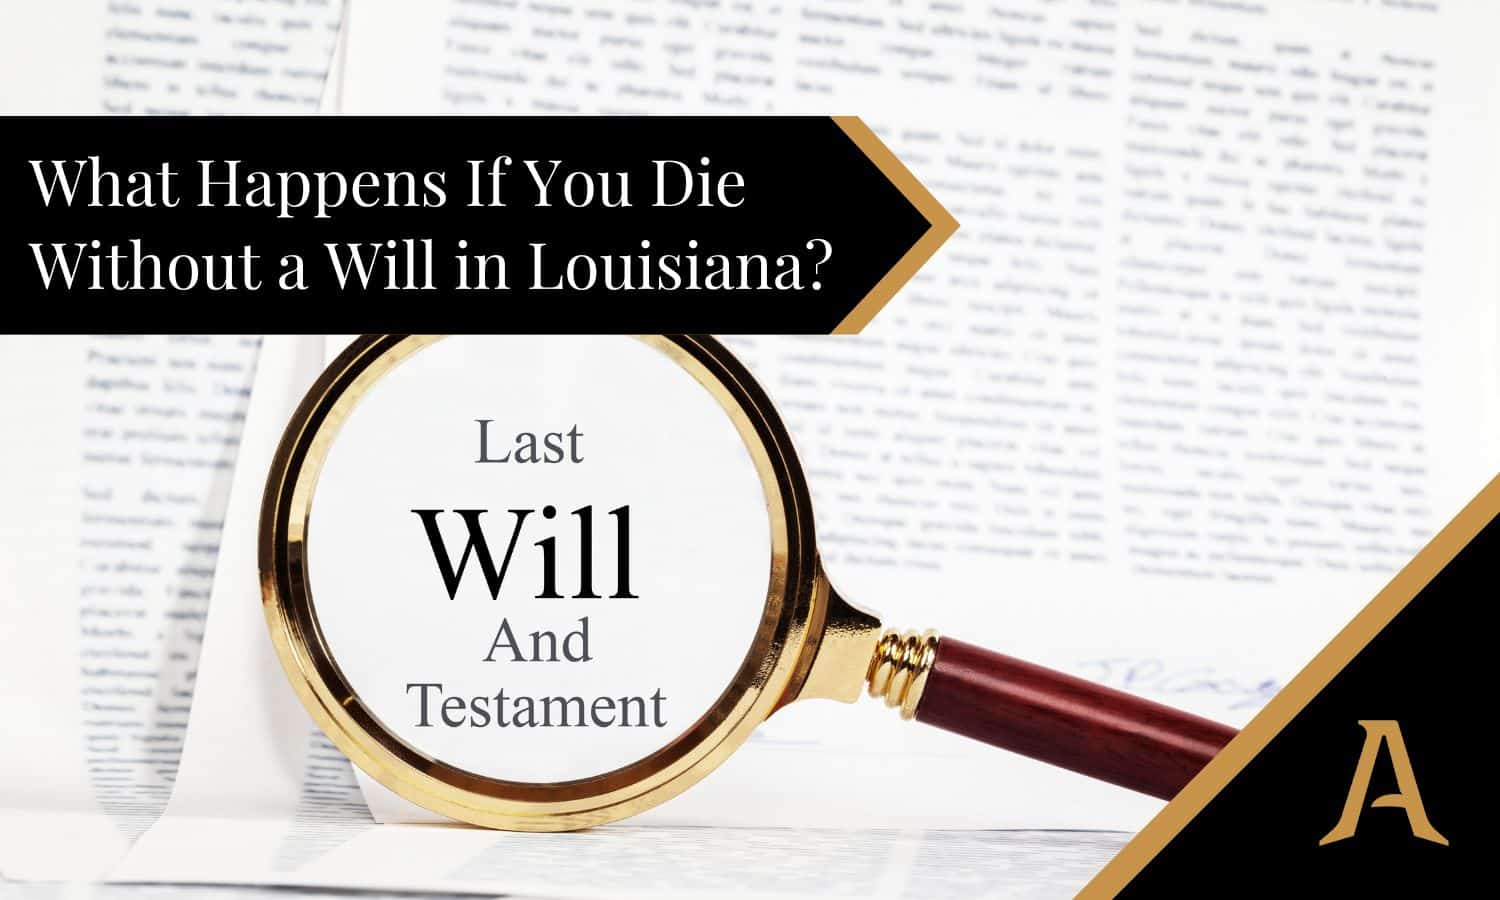 What Happens If You Die Without a Will in Louisiana